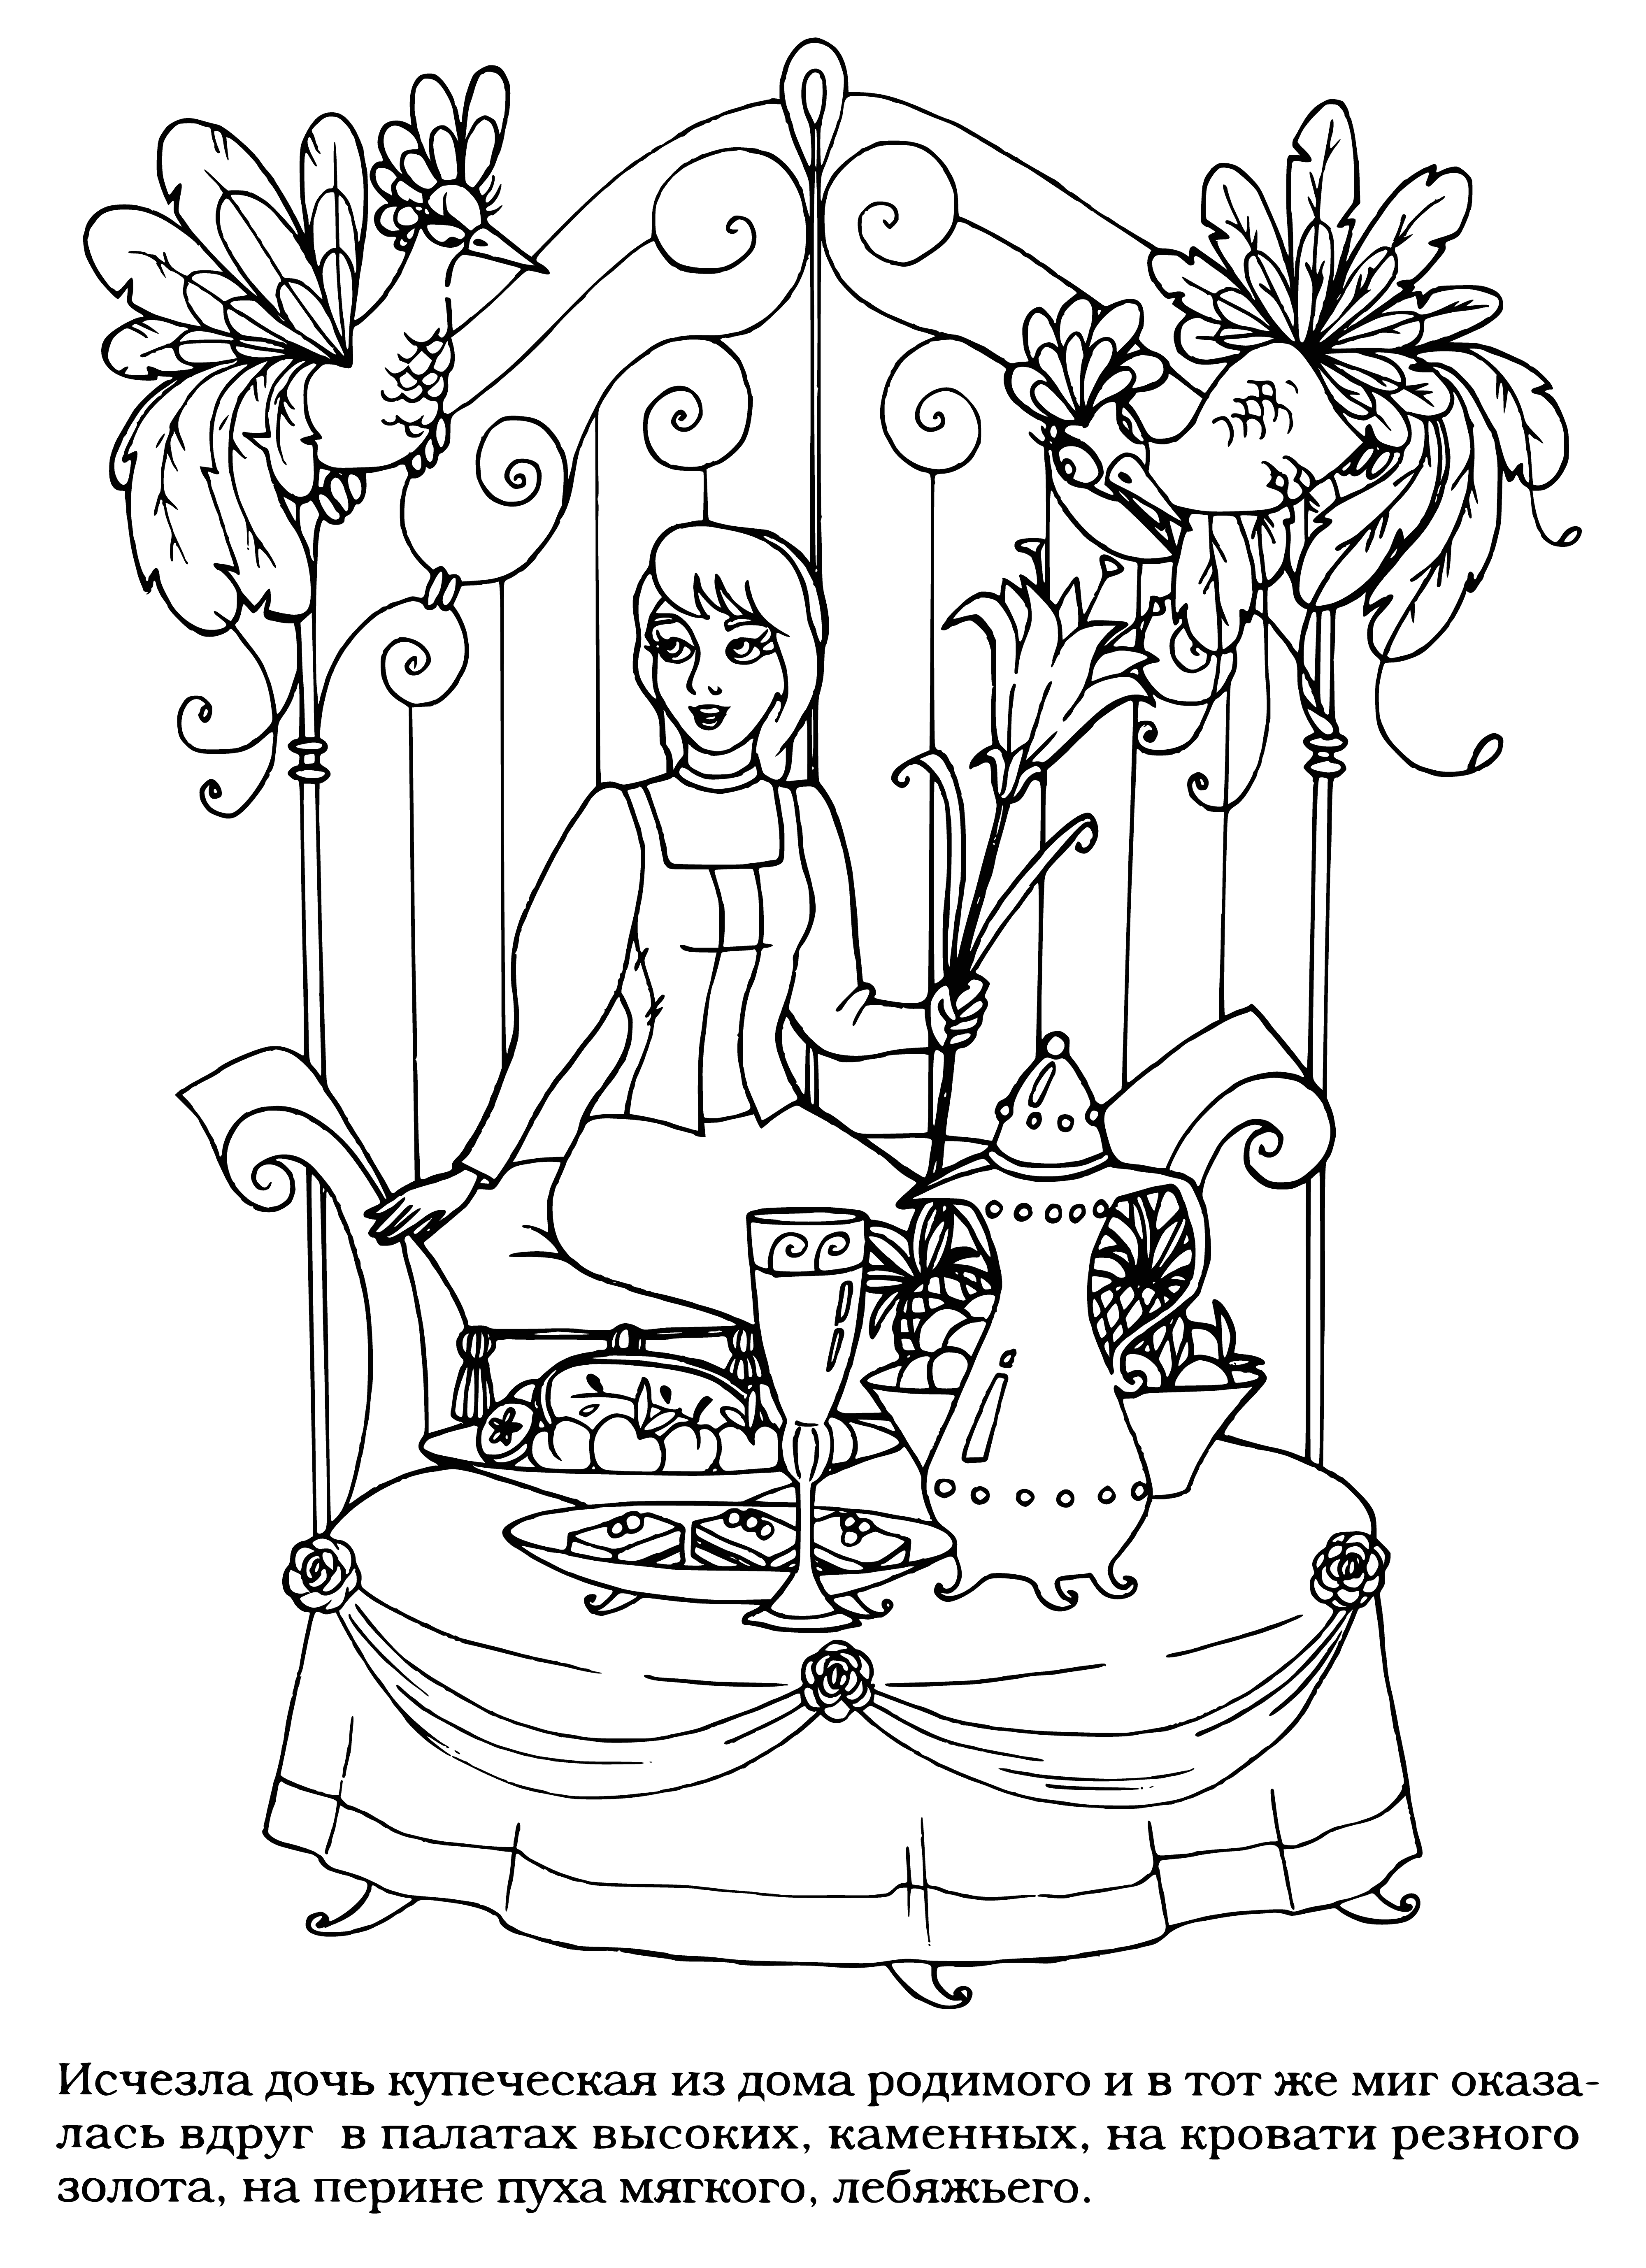 coloring page: Garden w/ many flowers (roses, lilies, etc.) Beautiful colors & amazing smell. There's a path that leads through it -- a sight to behold!